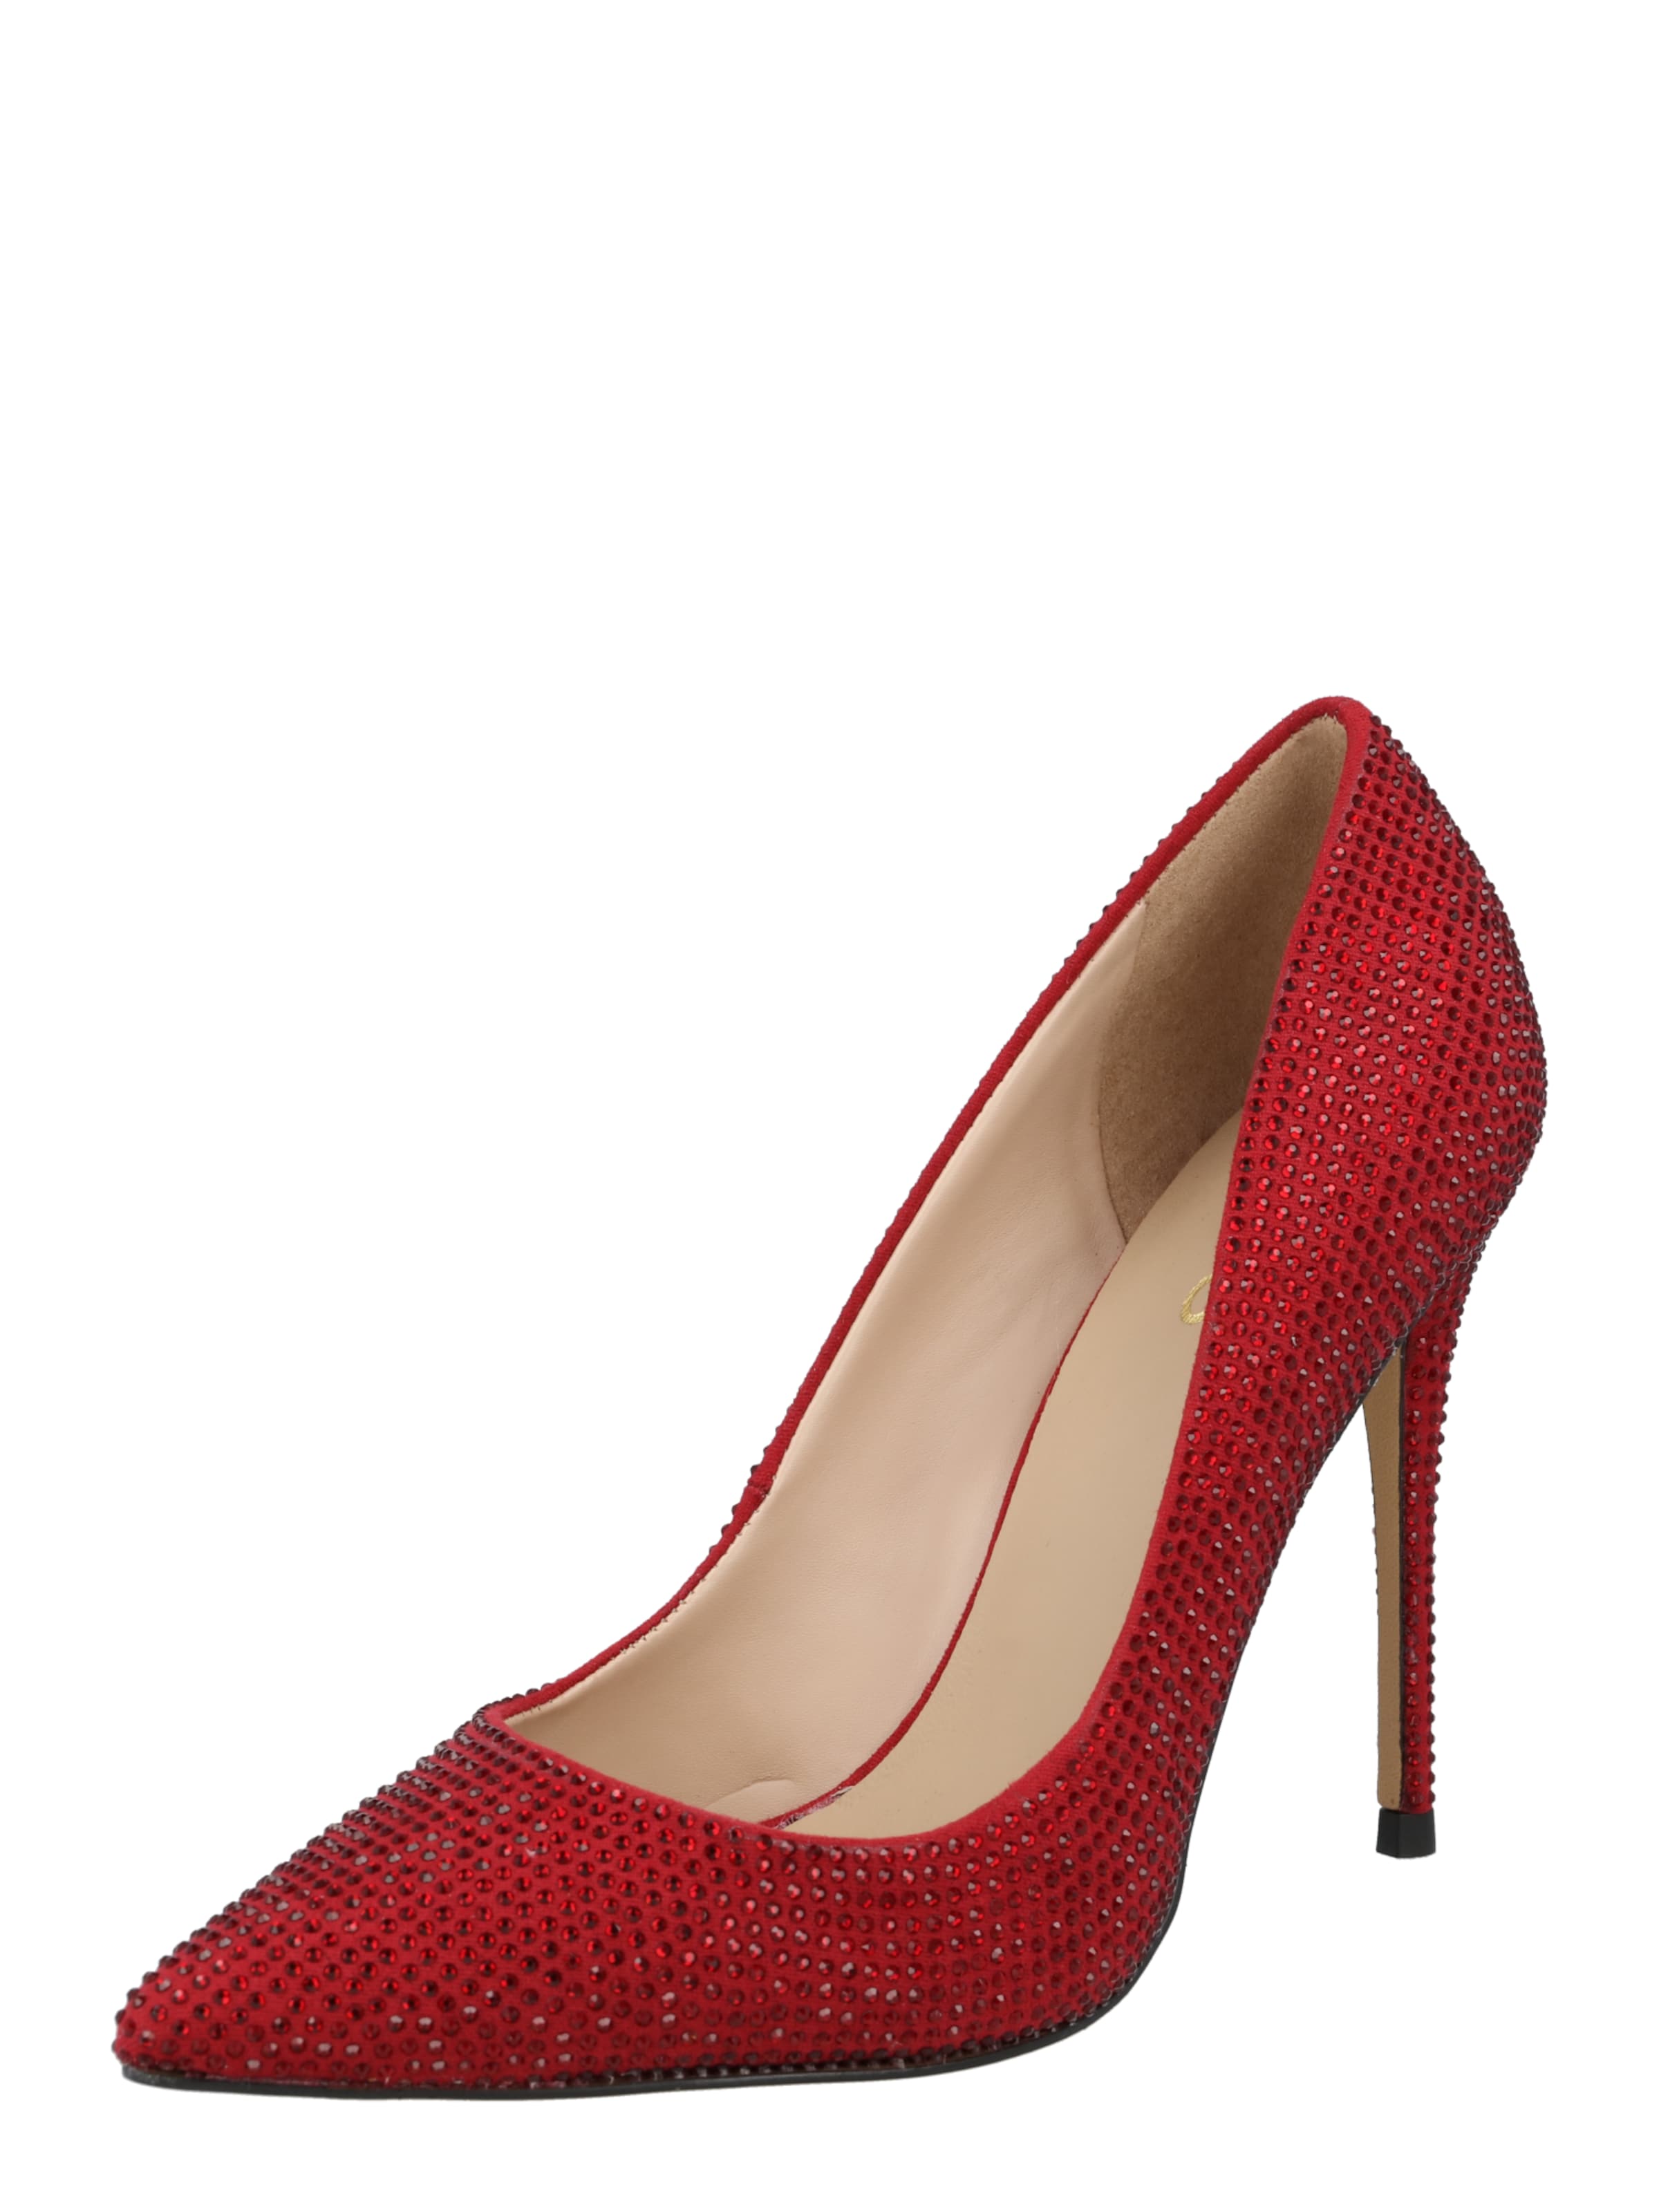 Classic Red Patent Cupid Heel - Limited Edition Valentine's Day Collection